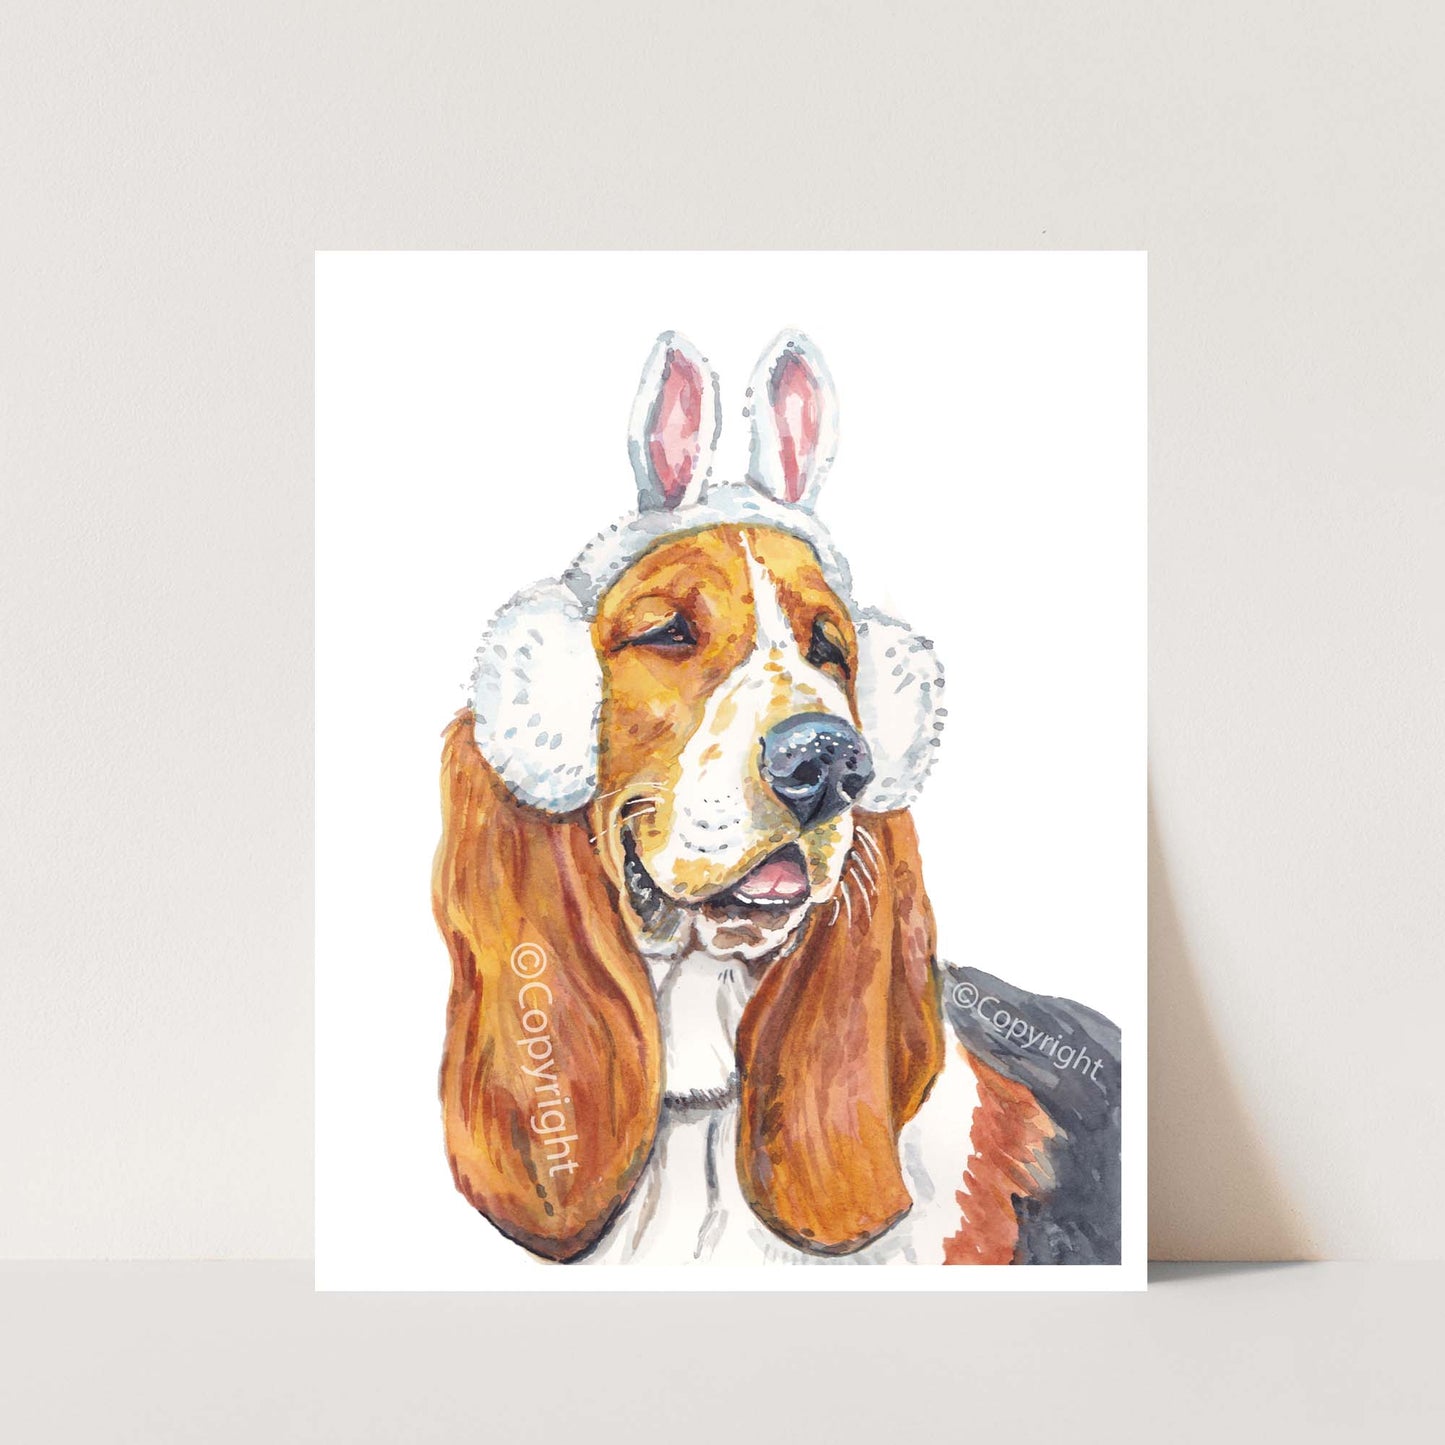 Watercolour painting of a Bassett hound dog wearing a set of ear muffs topped with bunny rabbit ears